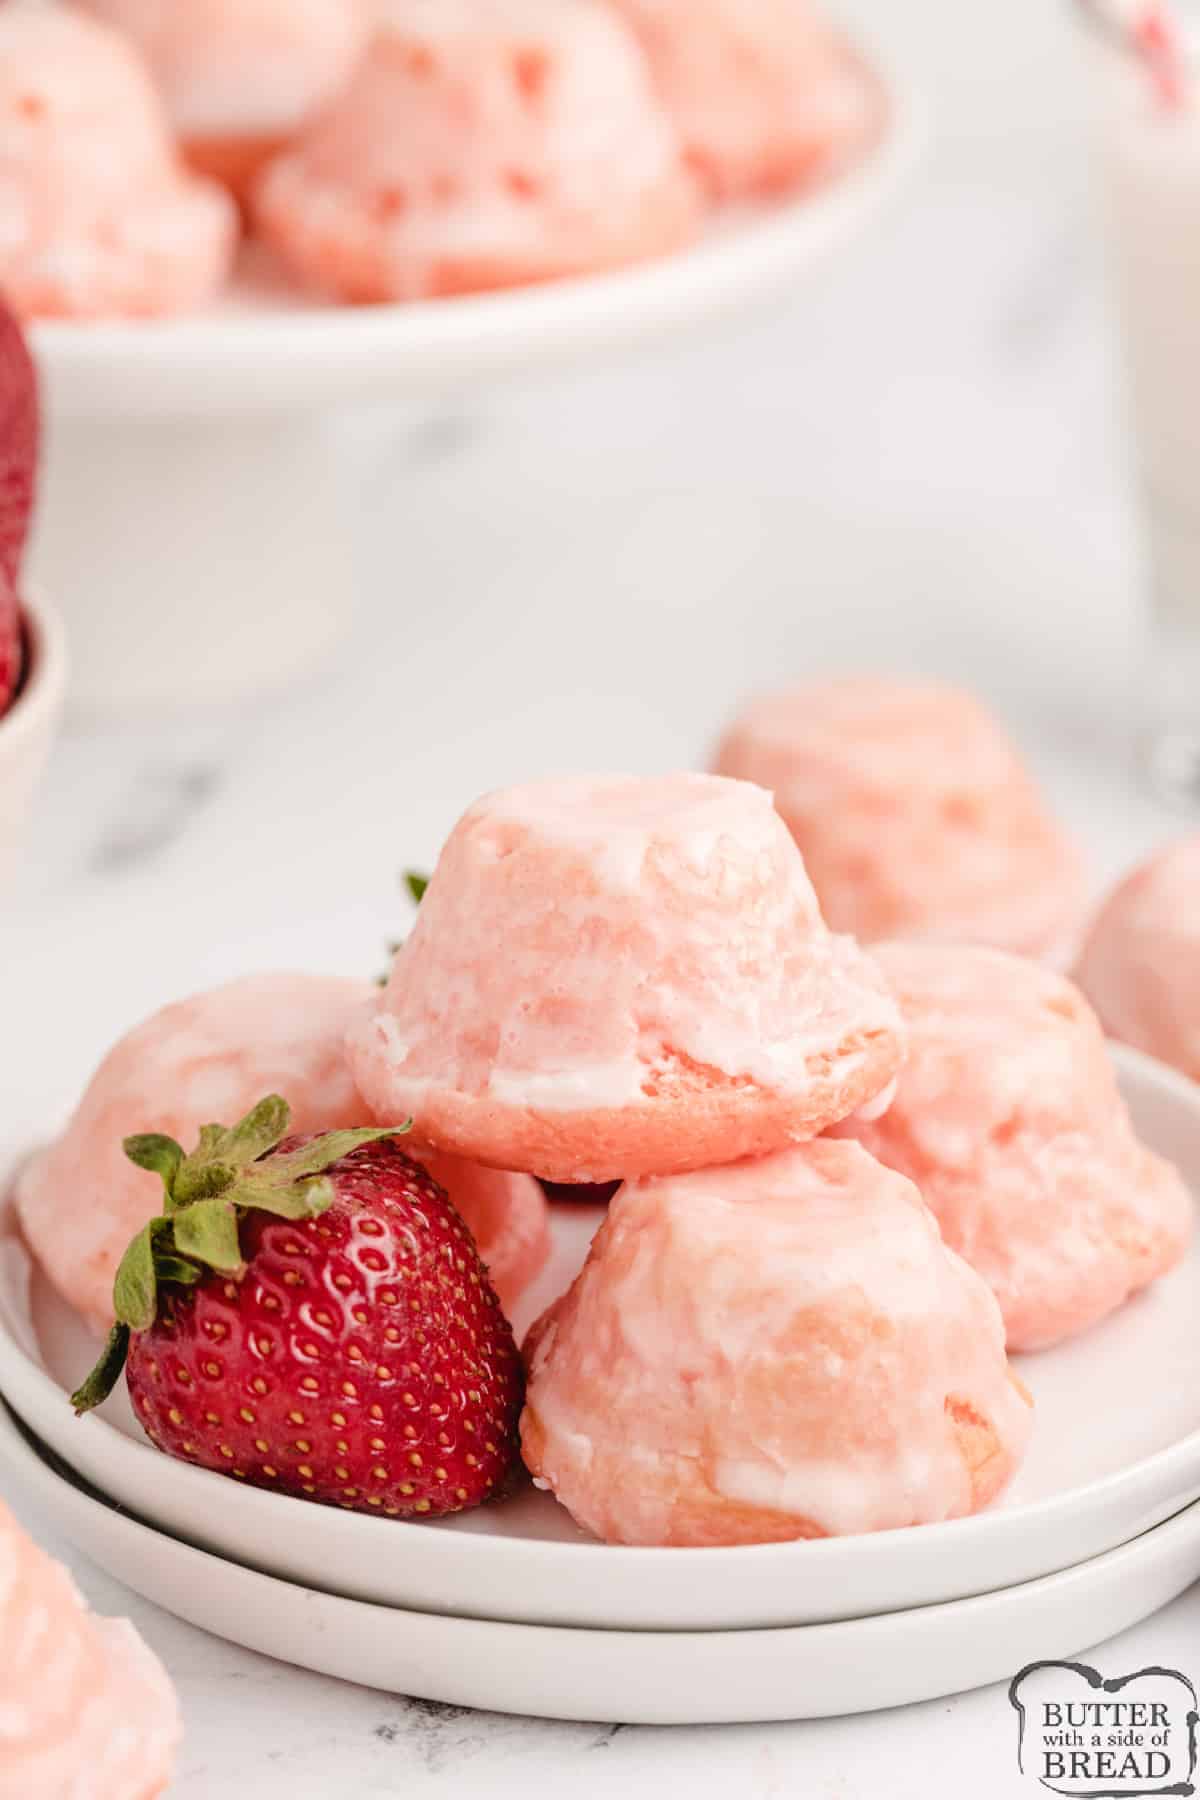 Glazed Mini Strawberry Cupcakes are delicious bite-sized treats that start with a strawberry cake mix. The easy strawberry glaze soaks into the bottoms to make these little cupcakes even more incredible.